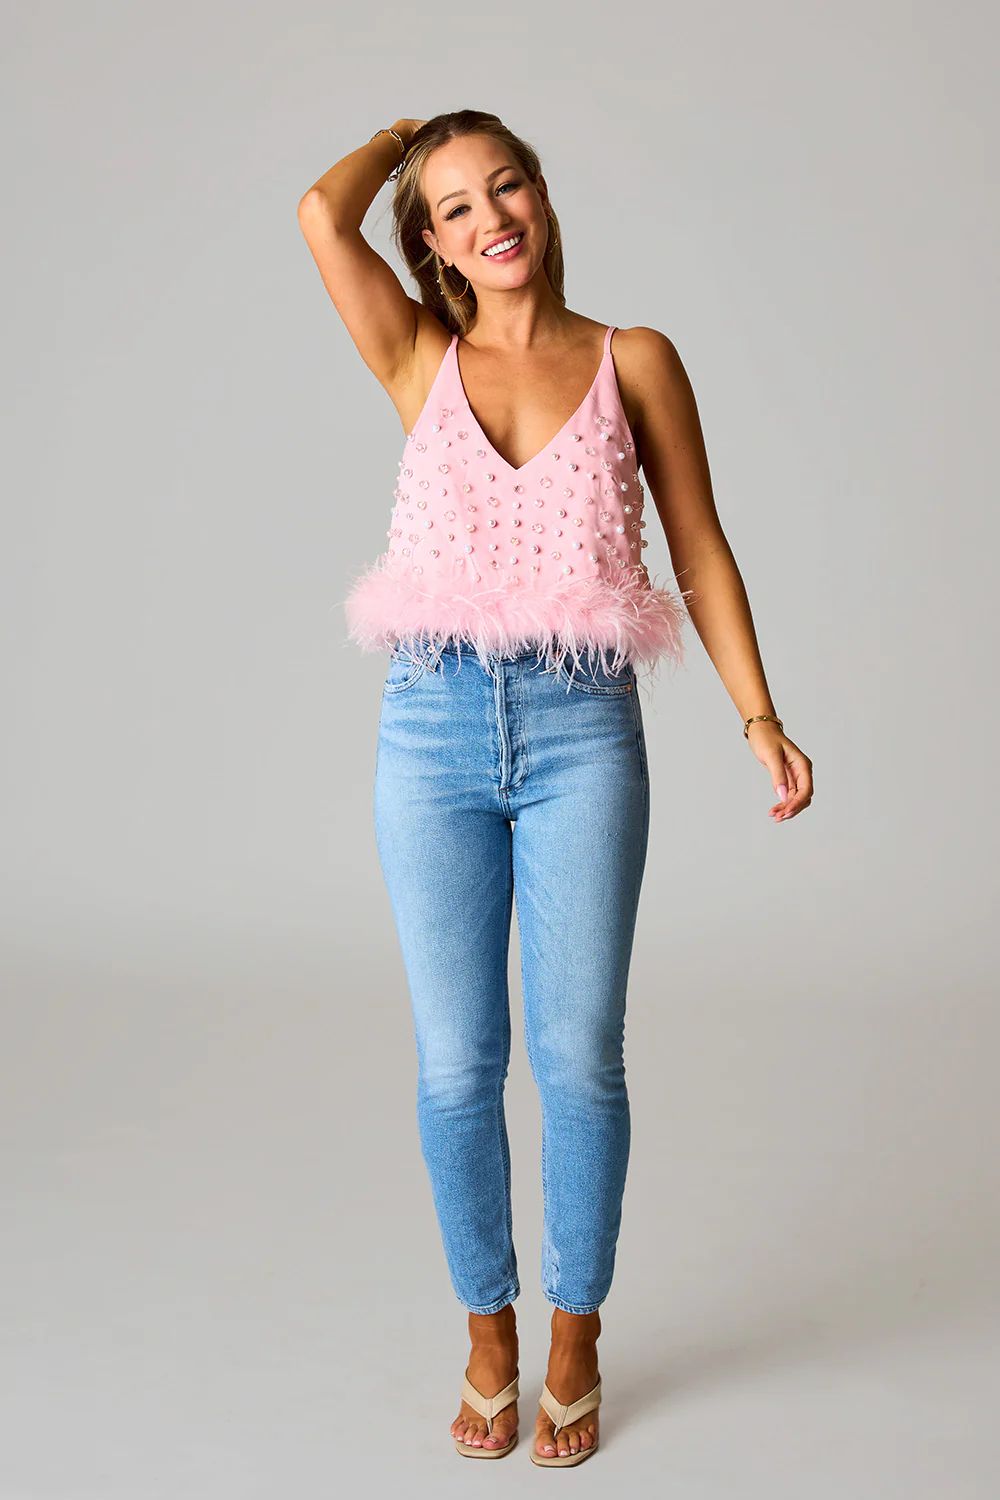 Seraphina Feather Top | Love story boutique